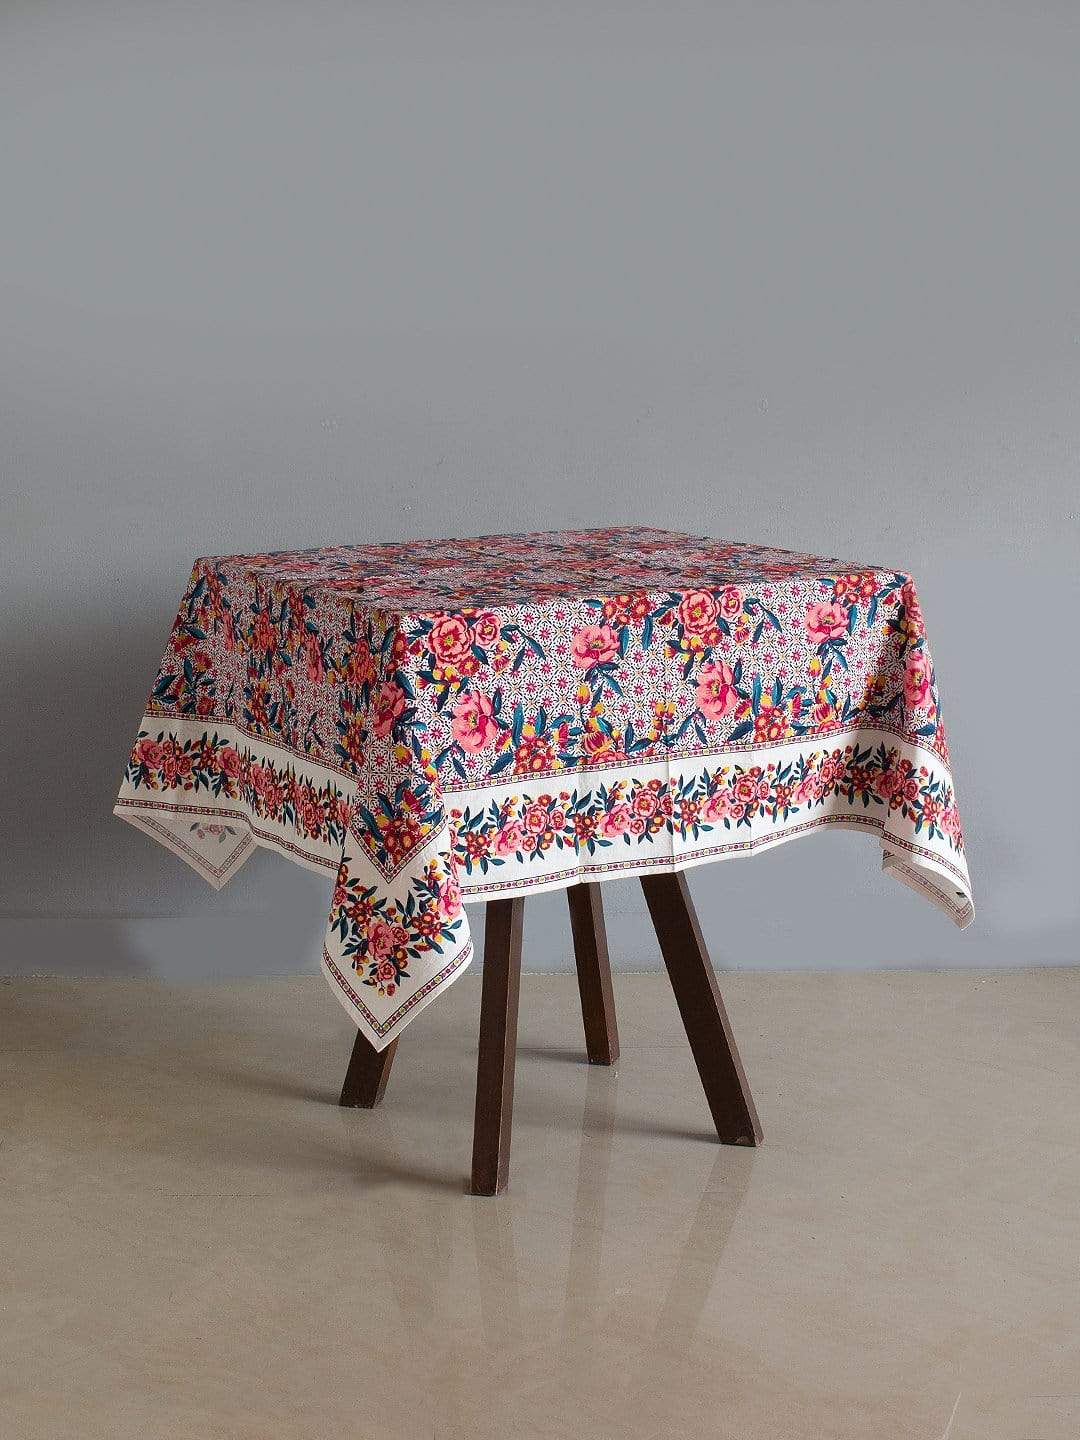 Poppy Petals Table Cover - Square